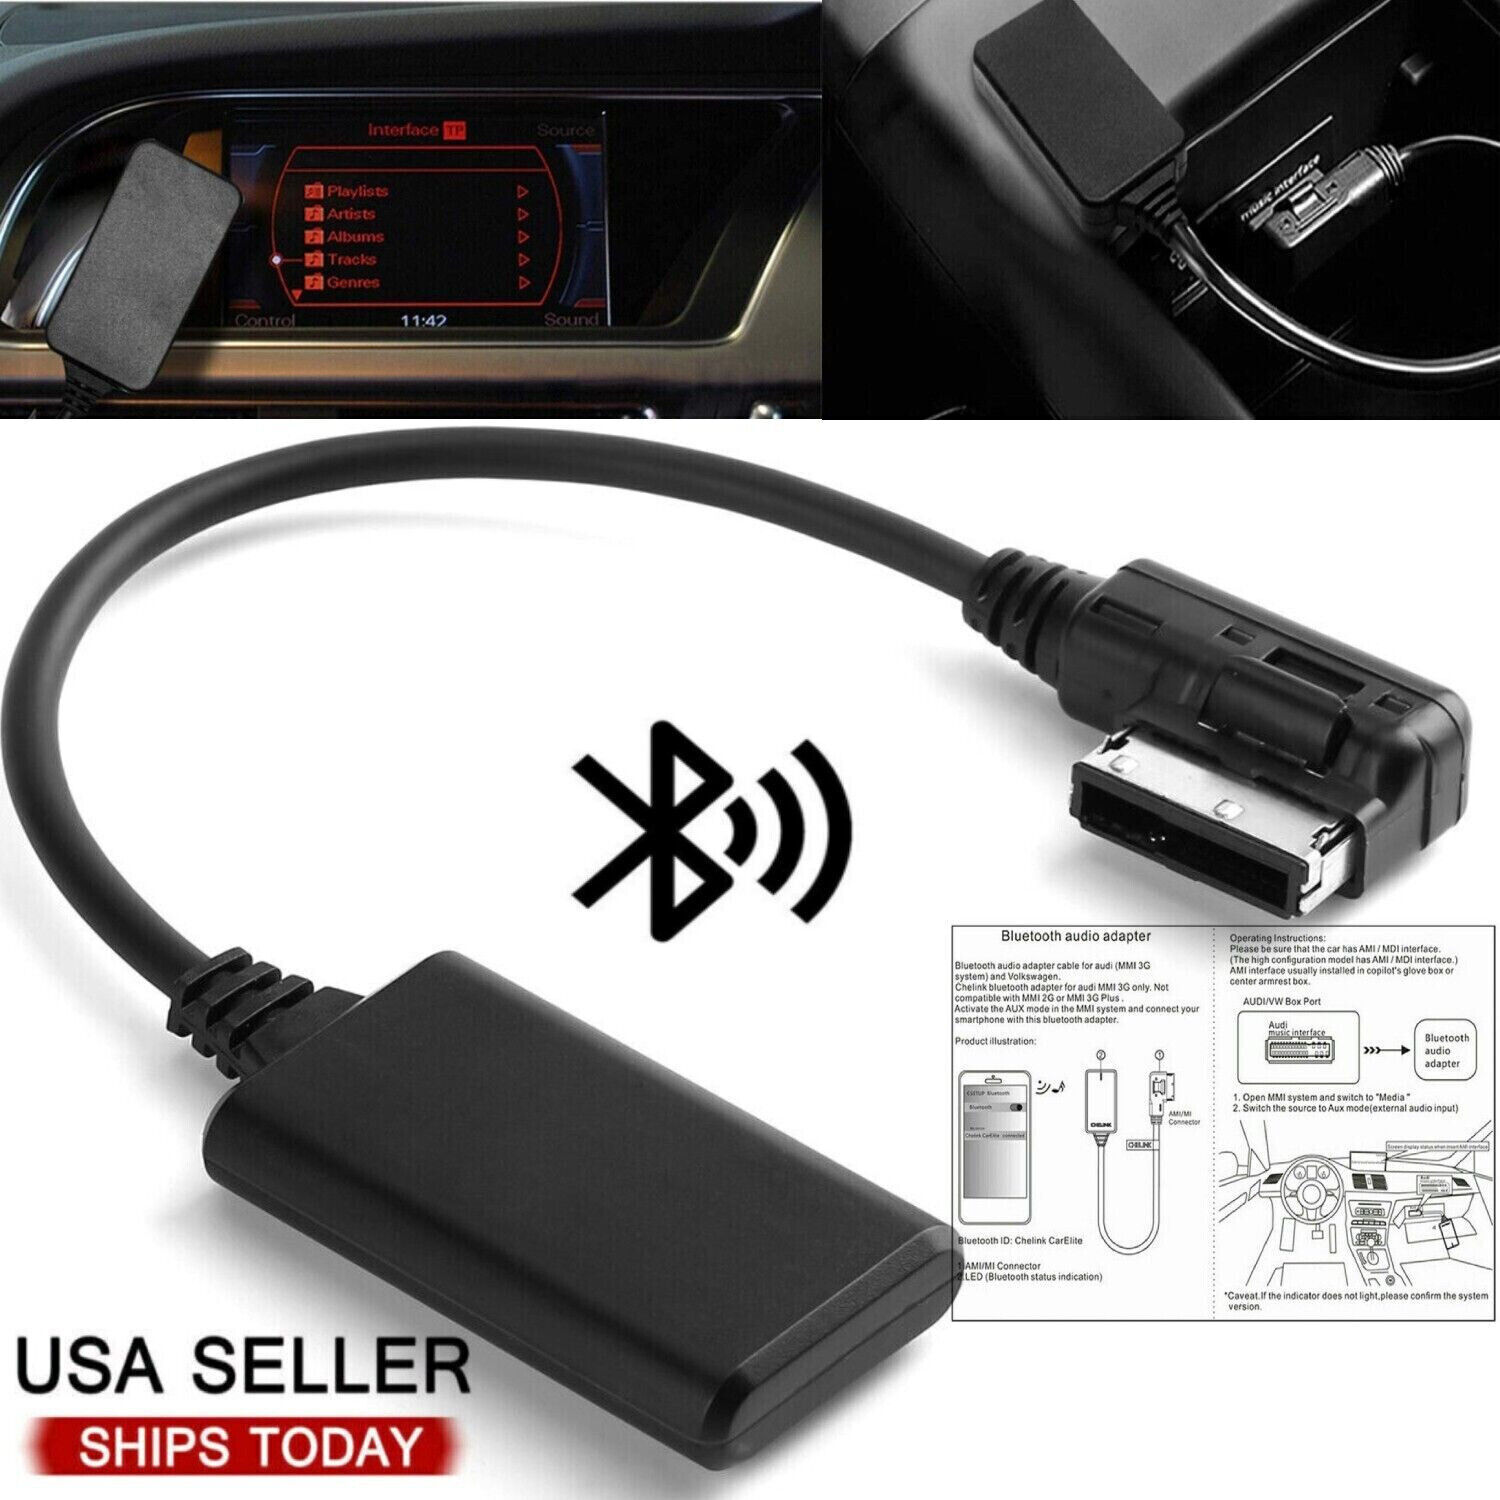 AMI MMI Bluetooth Music Interface Audio Cable Adapter For Audi A3 A4 A5 Q7 AUX